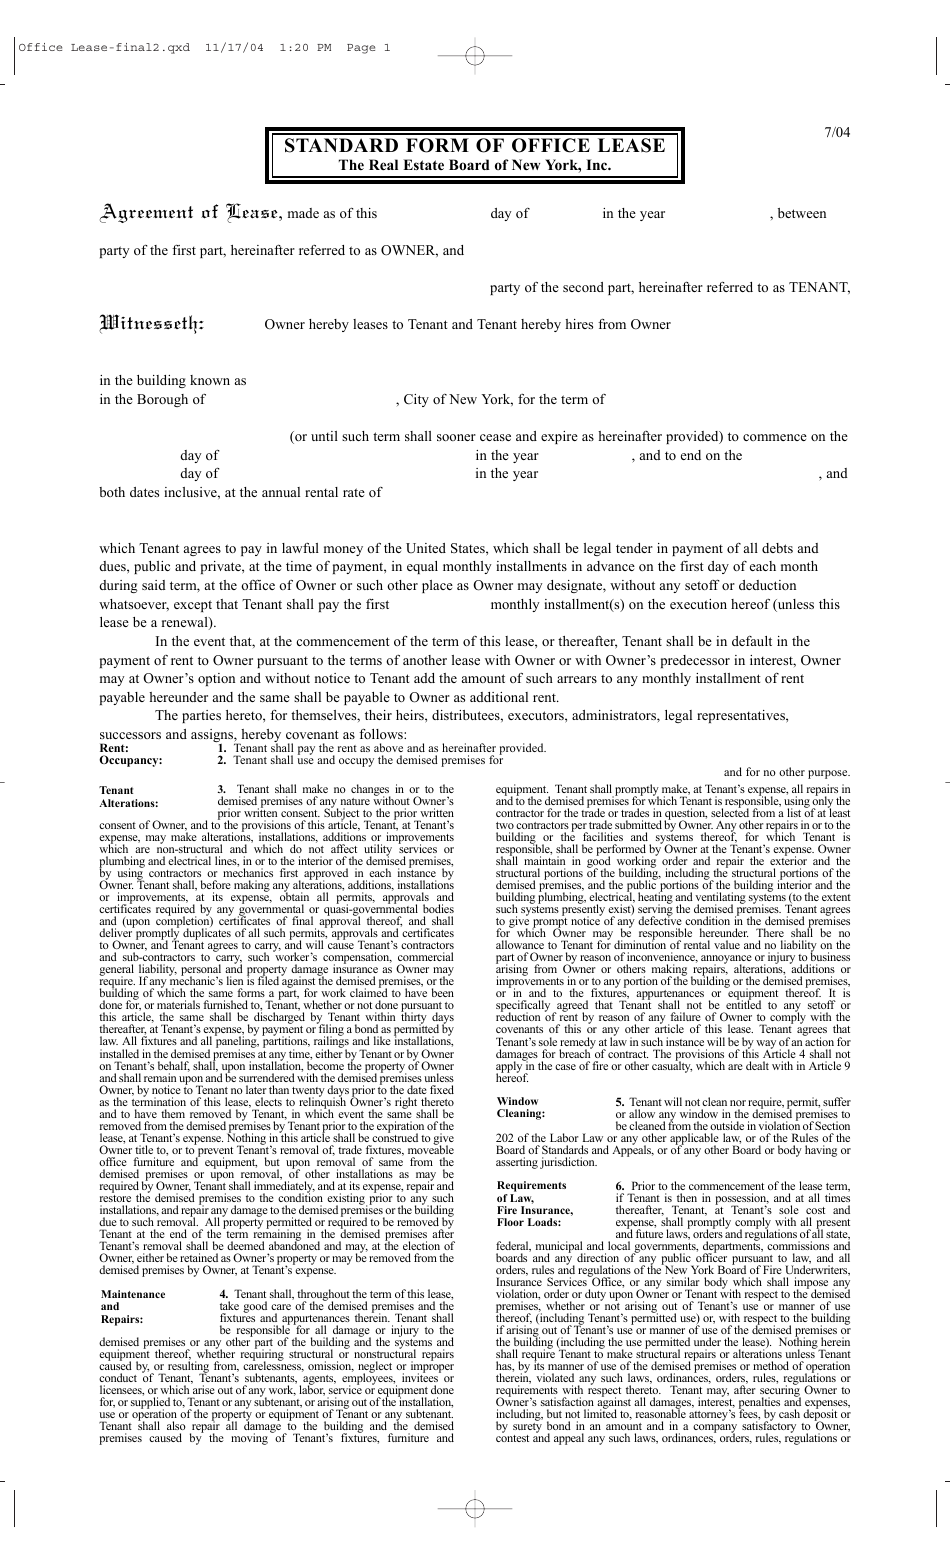 Standard Form of Office Lease - the Real Estate Board of New York, Inc - New York, Page 1